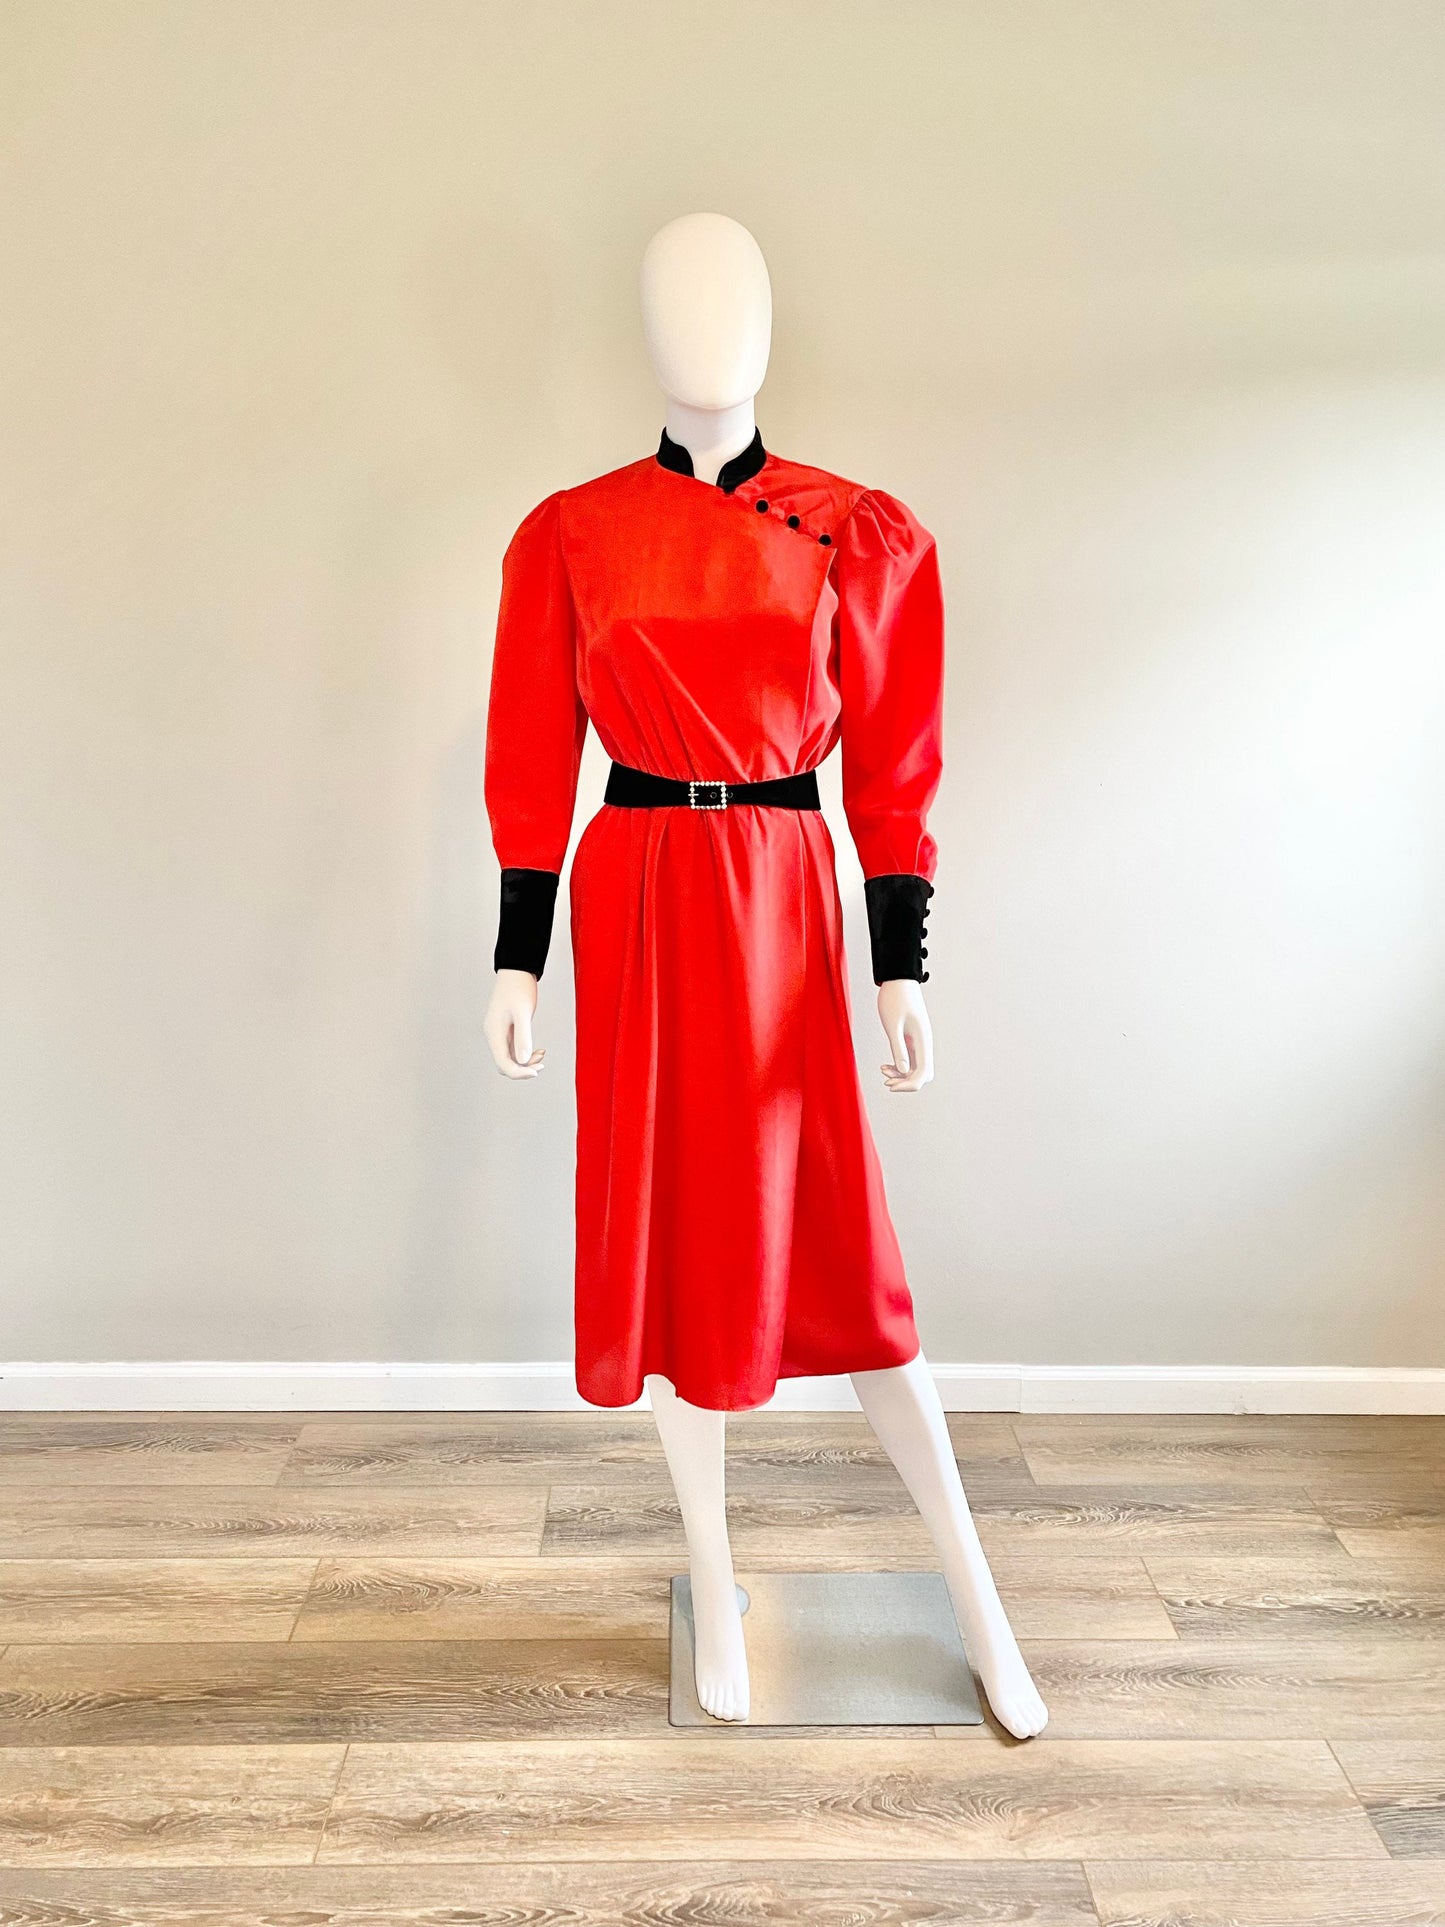 Vintage 1980s Red and Black Holiday Dress / 80s puff sleeve party dress / 1980s does 1940s dress / Size small